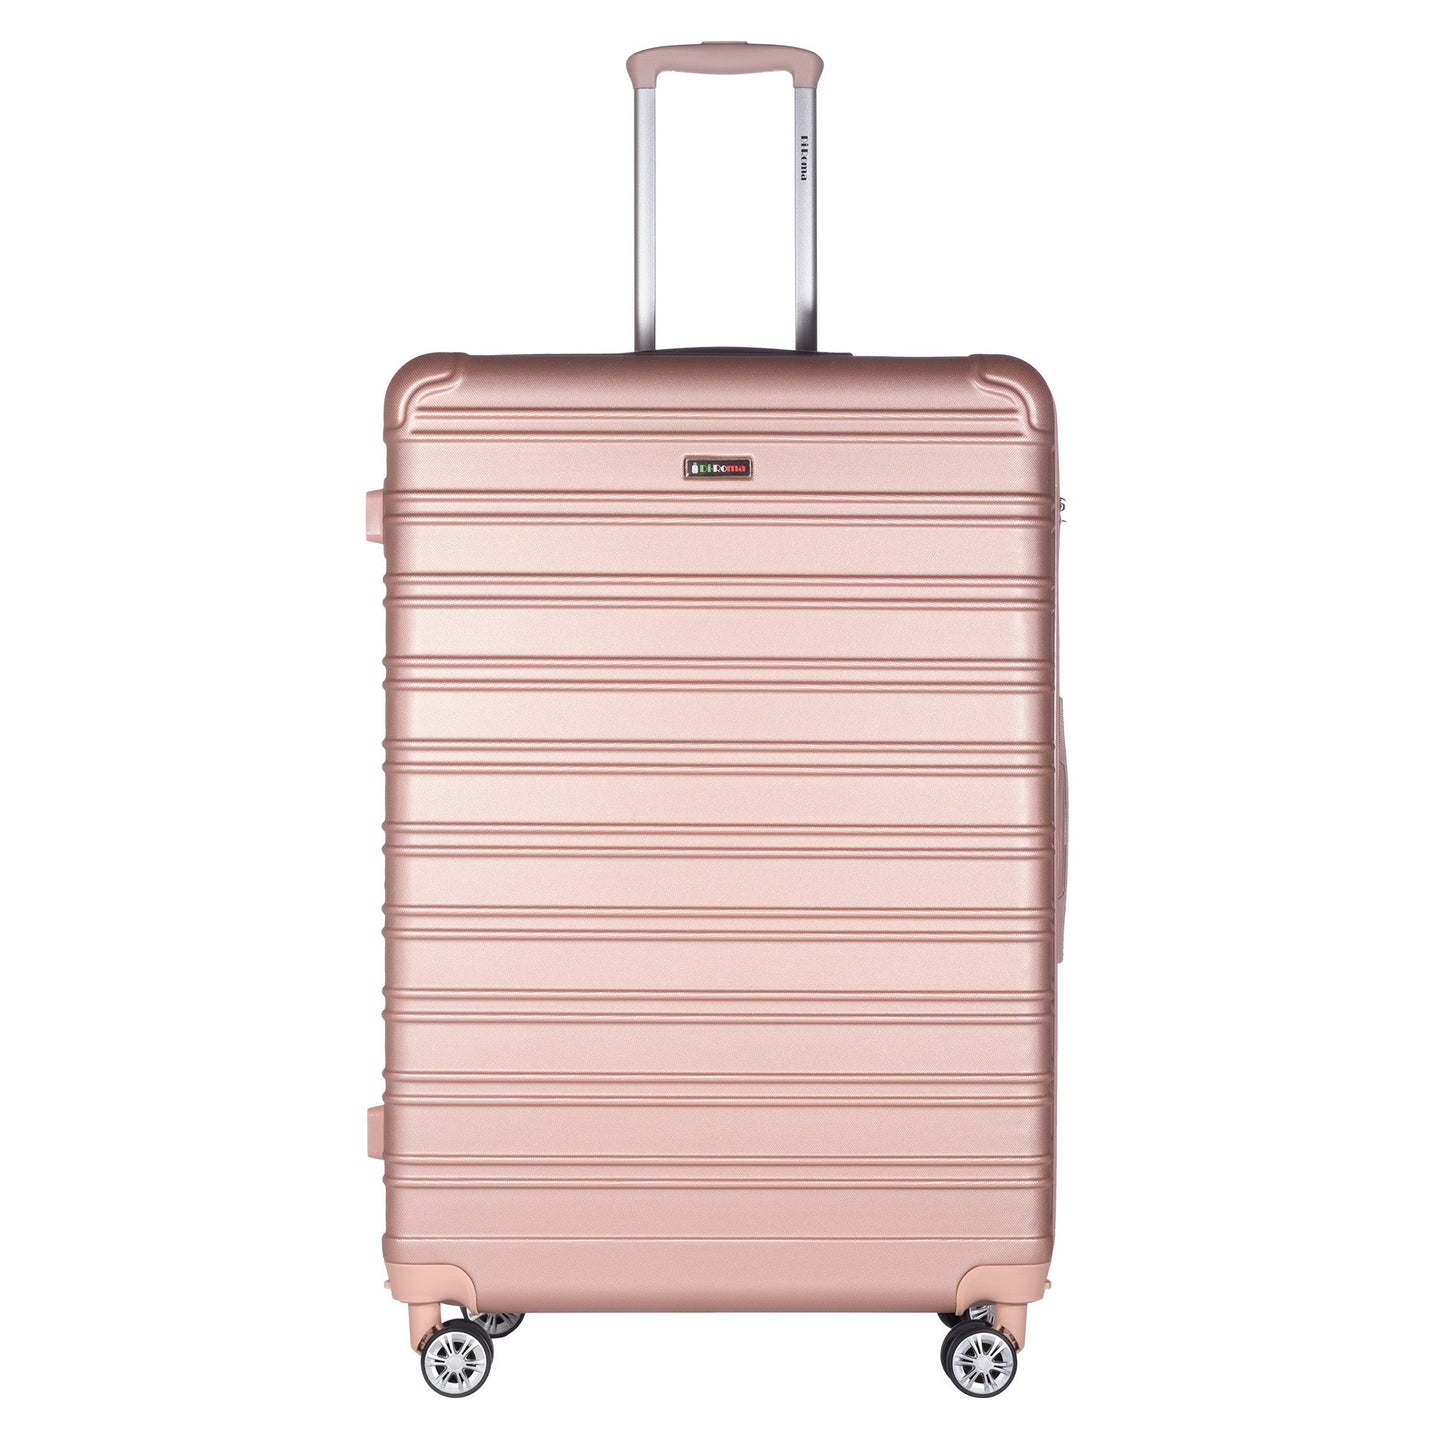 King Collection Rose Gold luggage (20/26/28/30") Suitcase Lock Spinner Hard